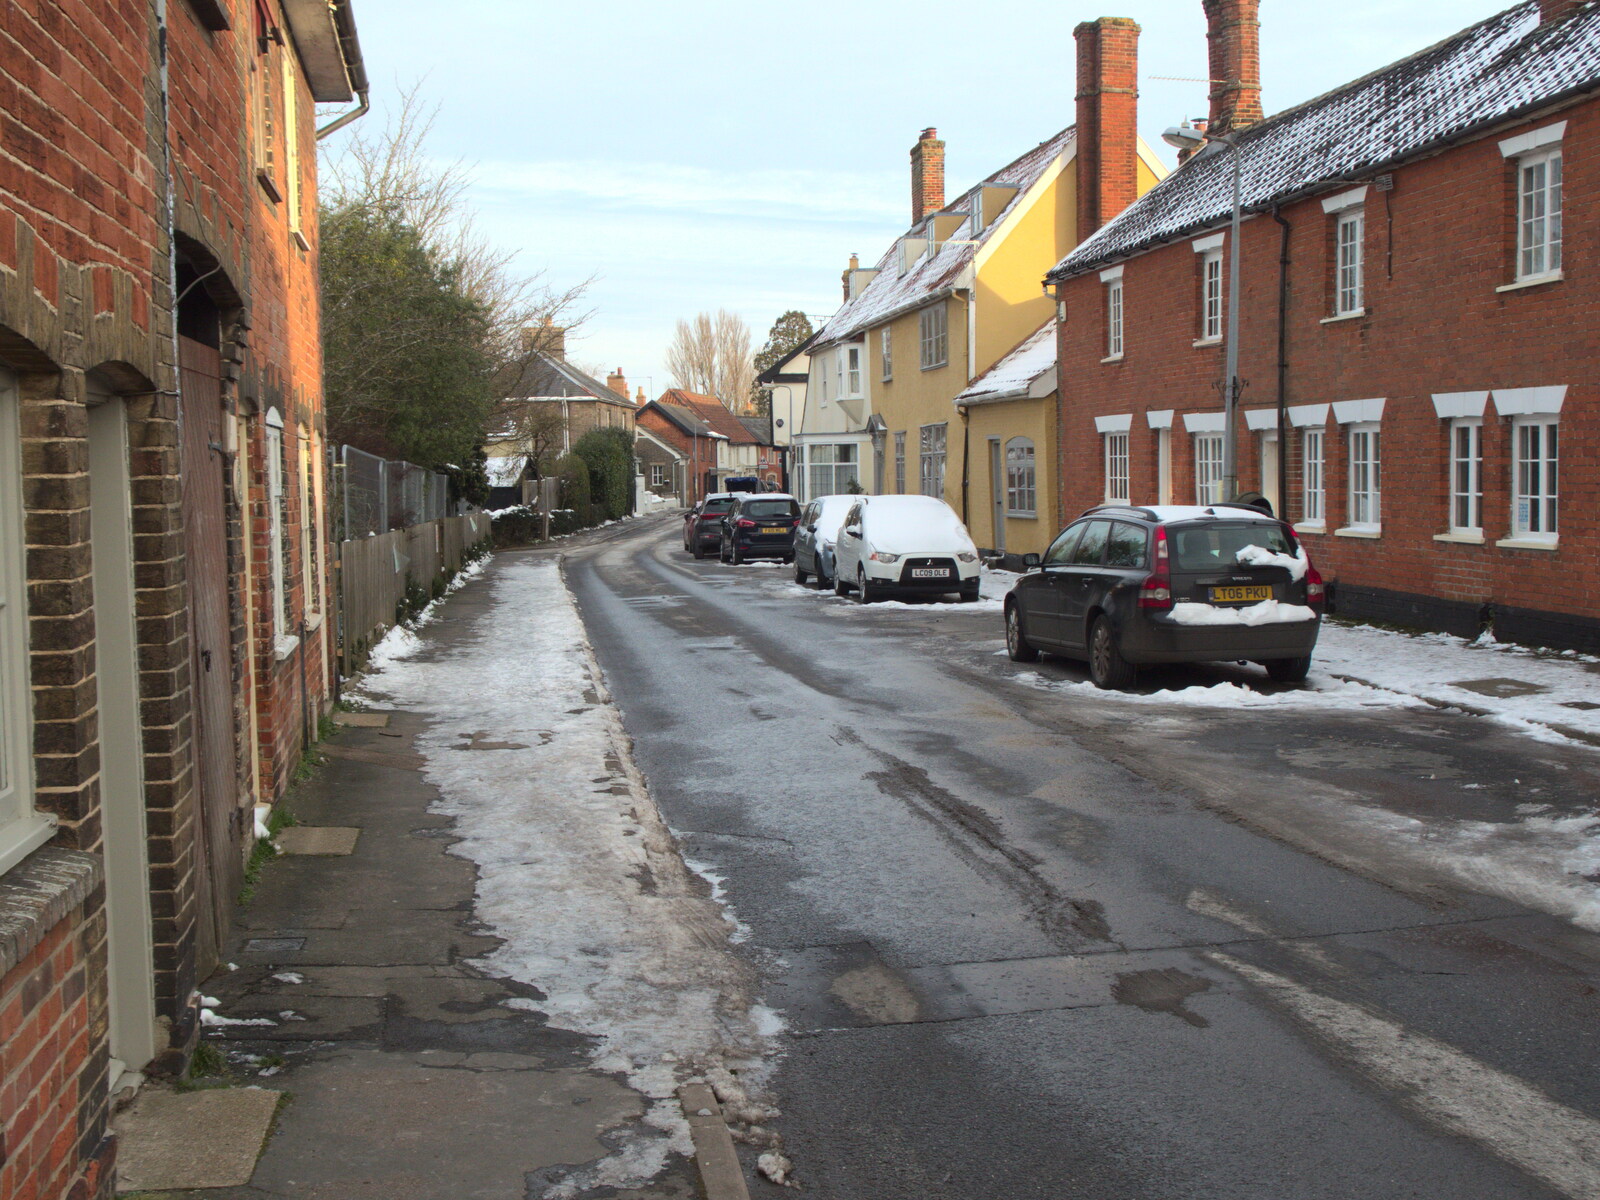 Church Street from Derelict Infants School and Ice Sculptures, Diss and Palgrave, Norfolk and Suffolk - 13th February 2021